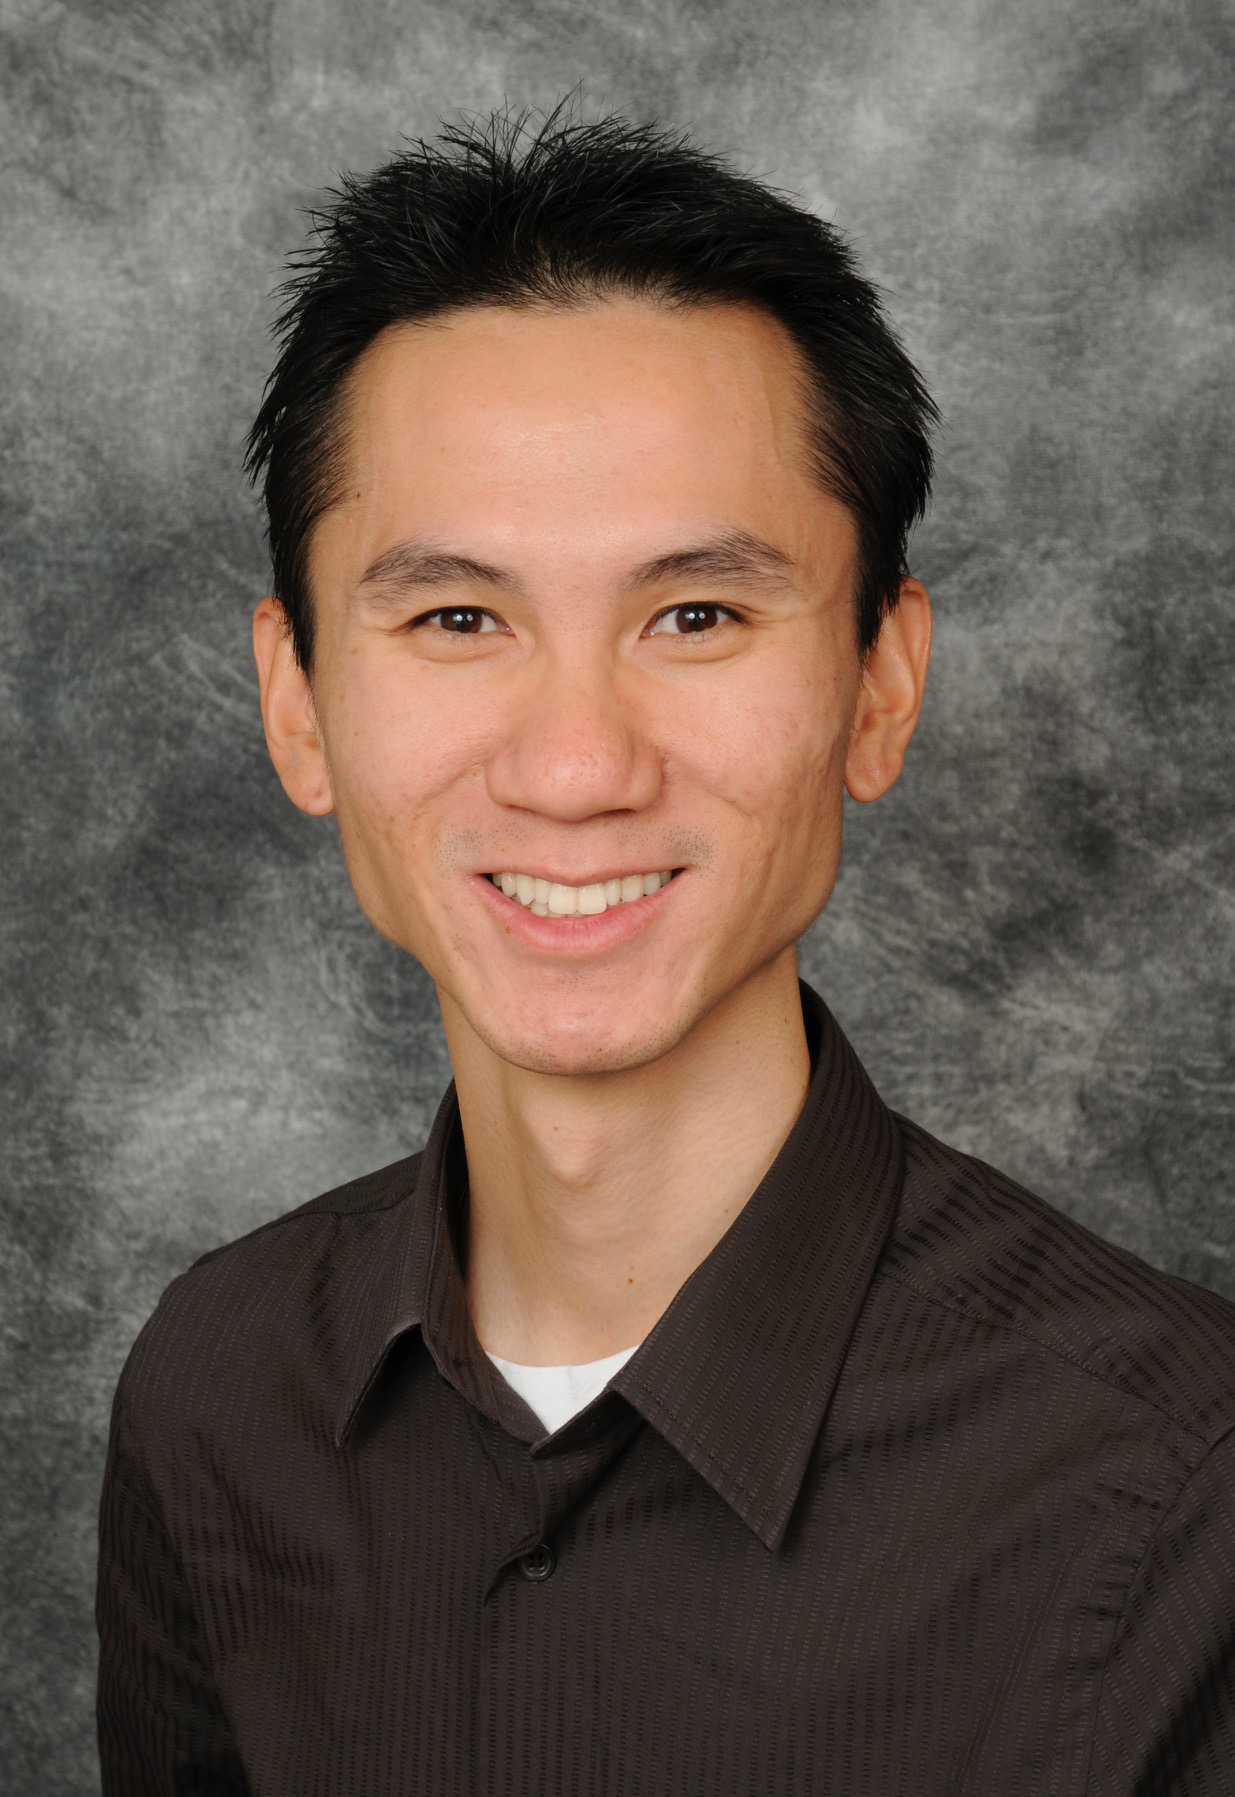 The Department of Materials Science and Engineering Welcomes Senior Lecturer Eric Huang